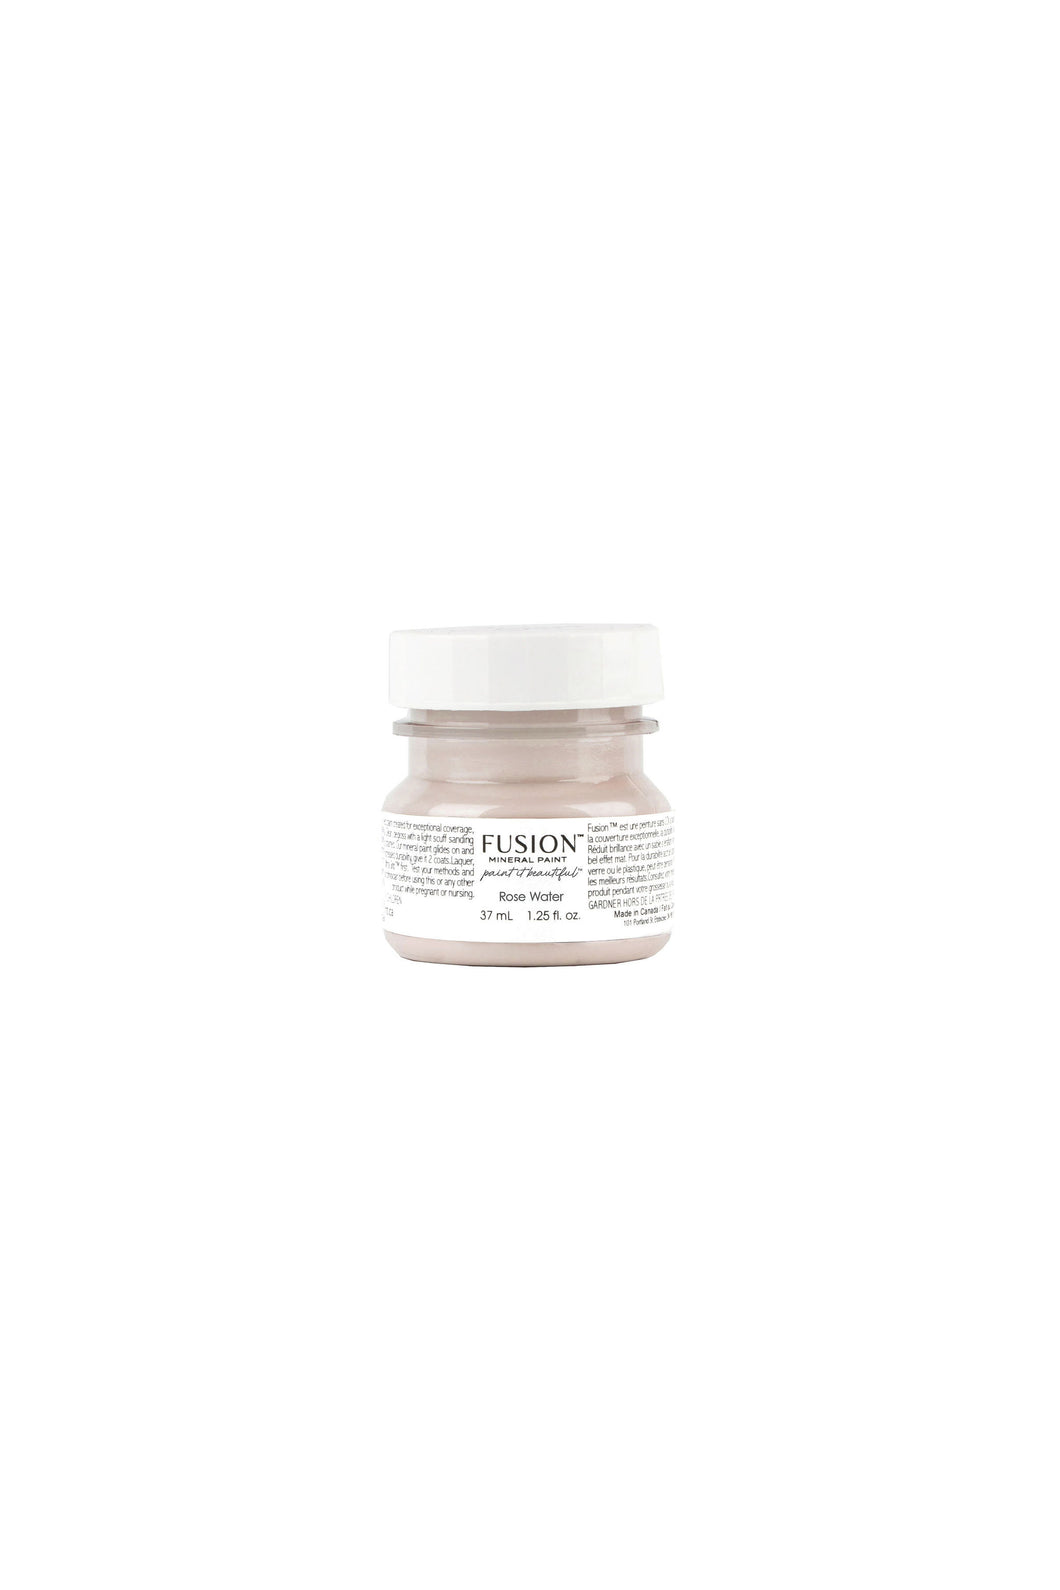 Fusion Mineral Paint - Rose Water 37 ml Jar